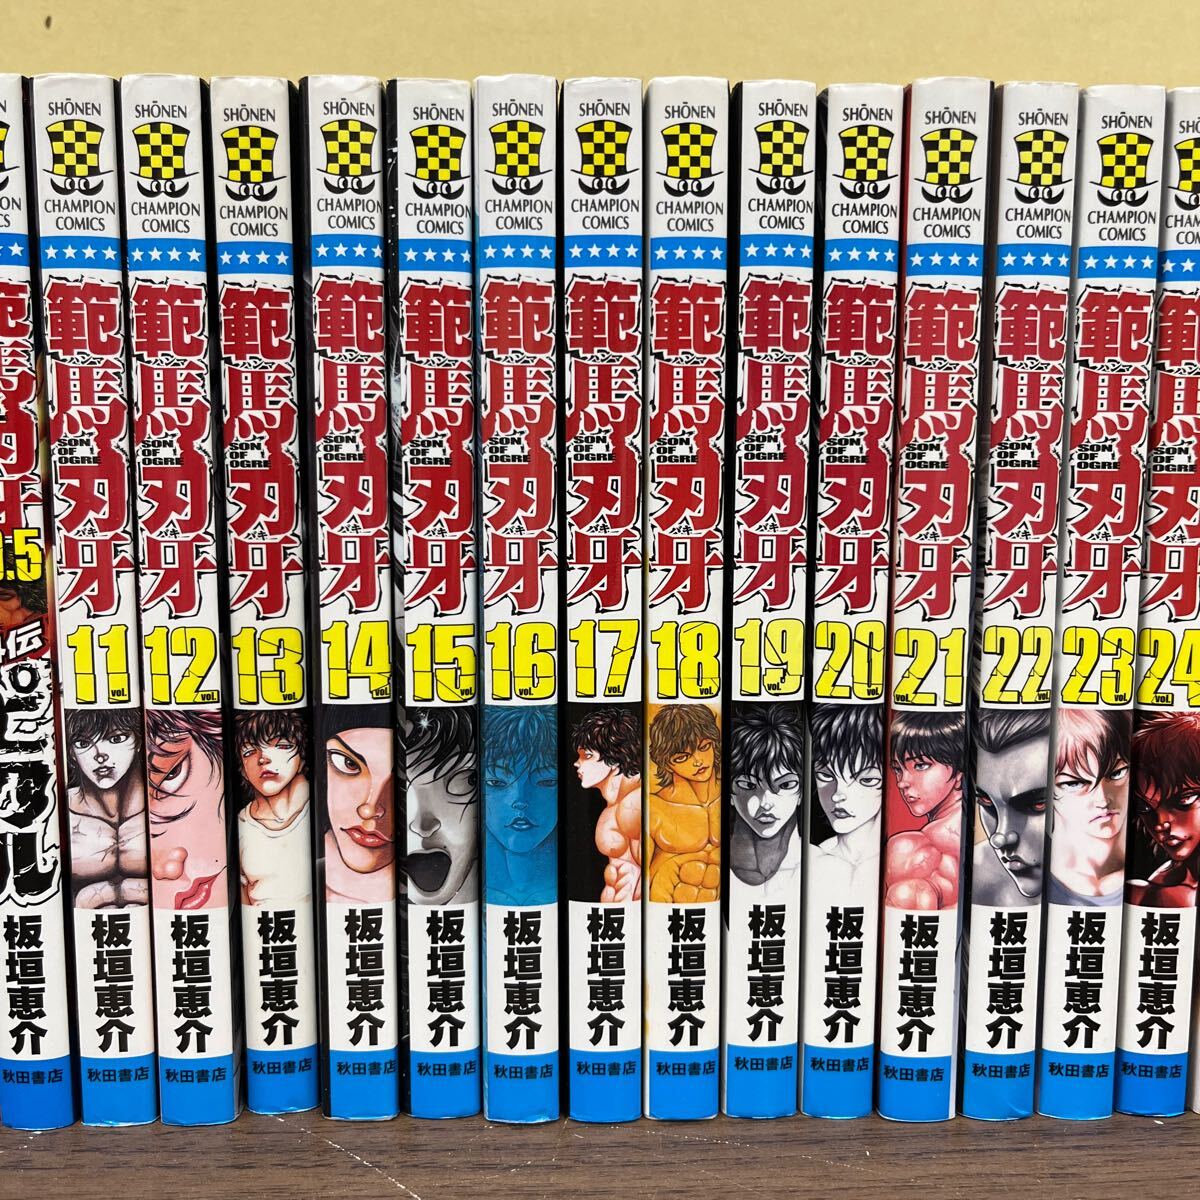 . horse blade . all 38 volume set (10.5 volume out . contains ) board ... Baki Champion Akita bookstore / secondhand book / because of aging dirt scorch some stains scratch / condition is in the image verification ./NC.